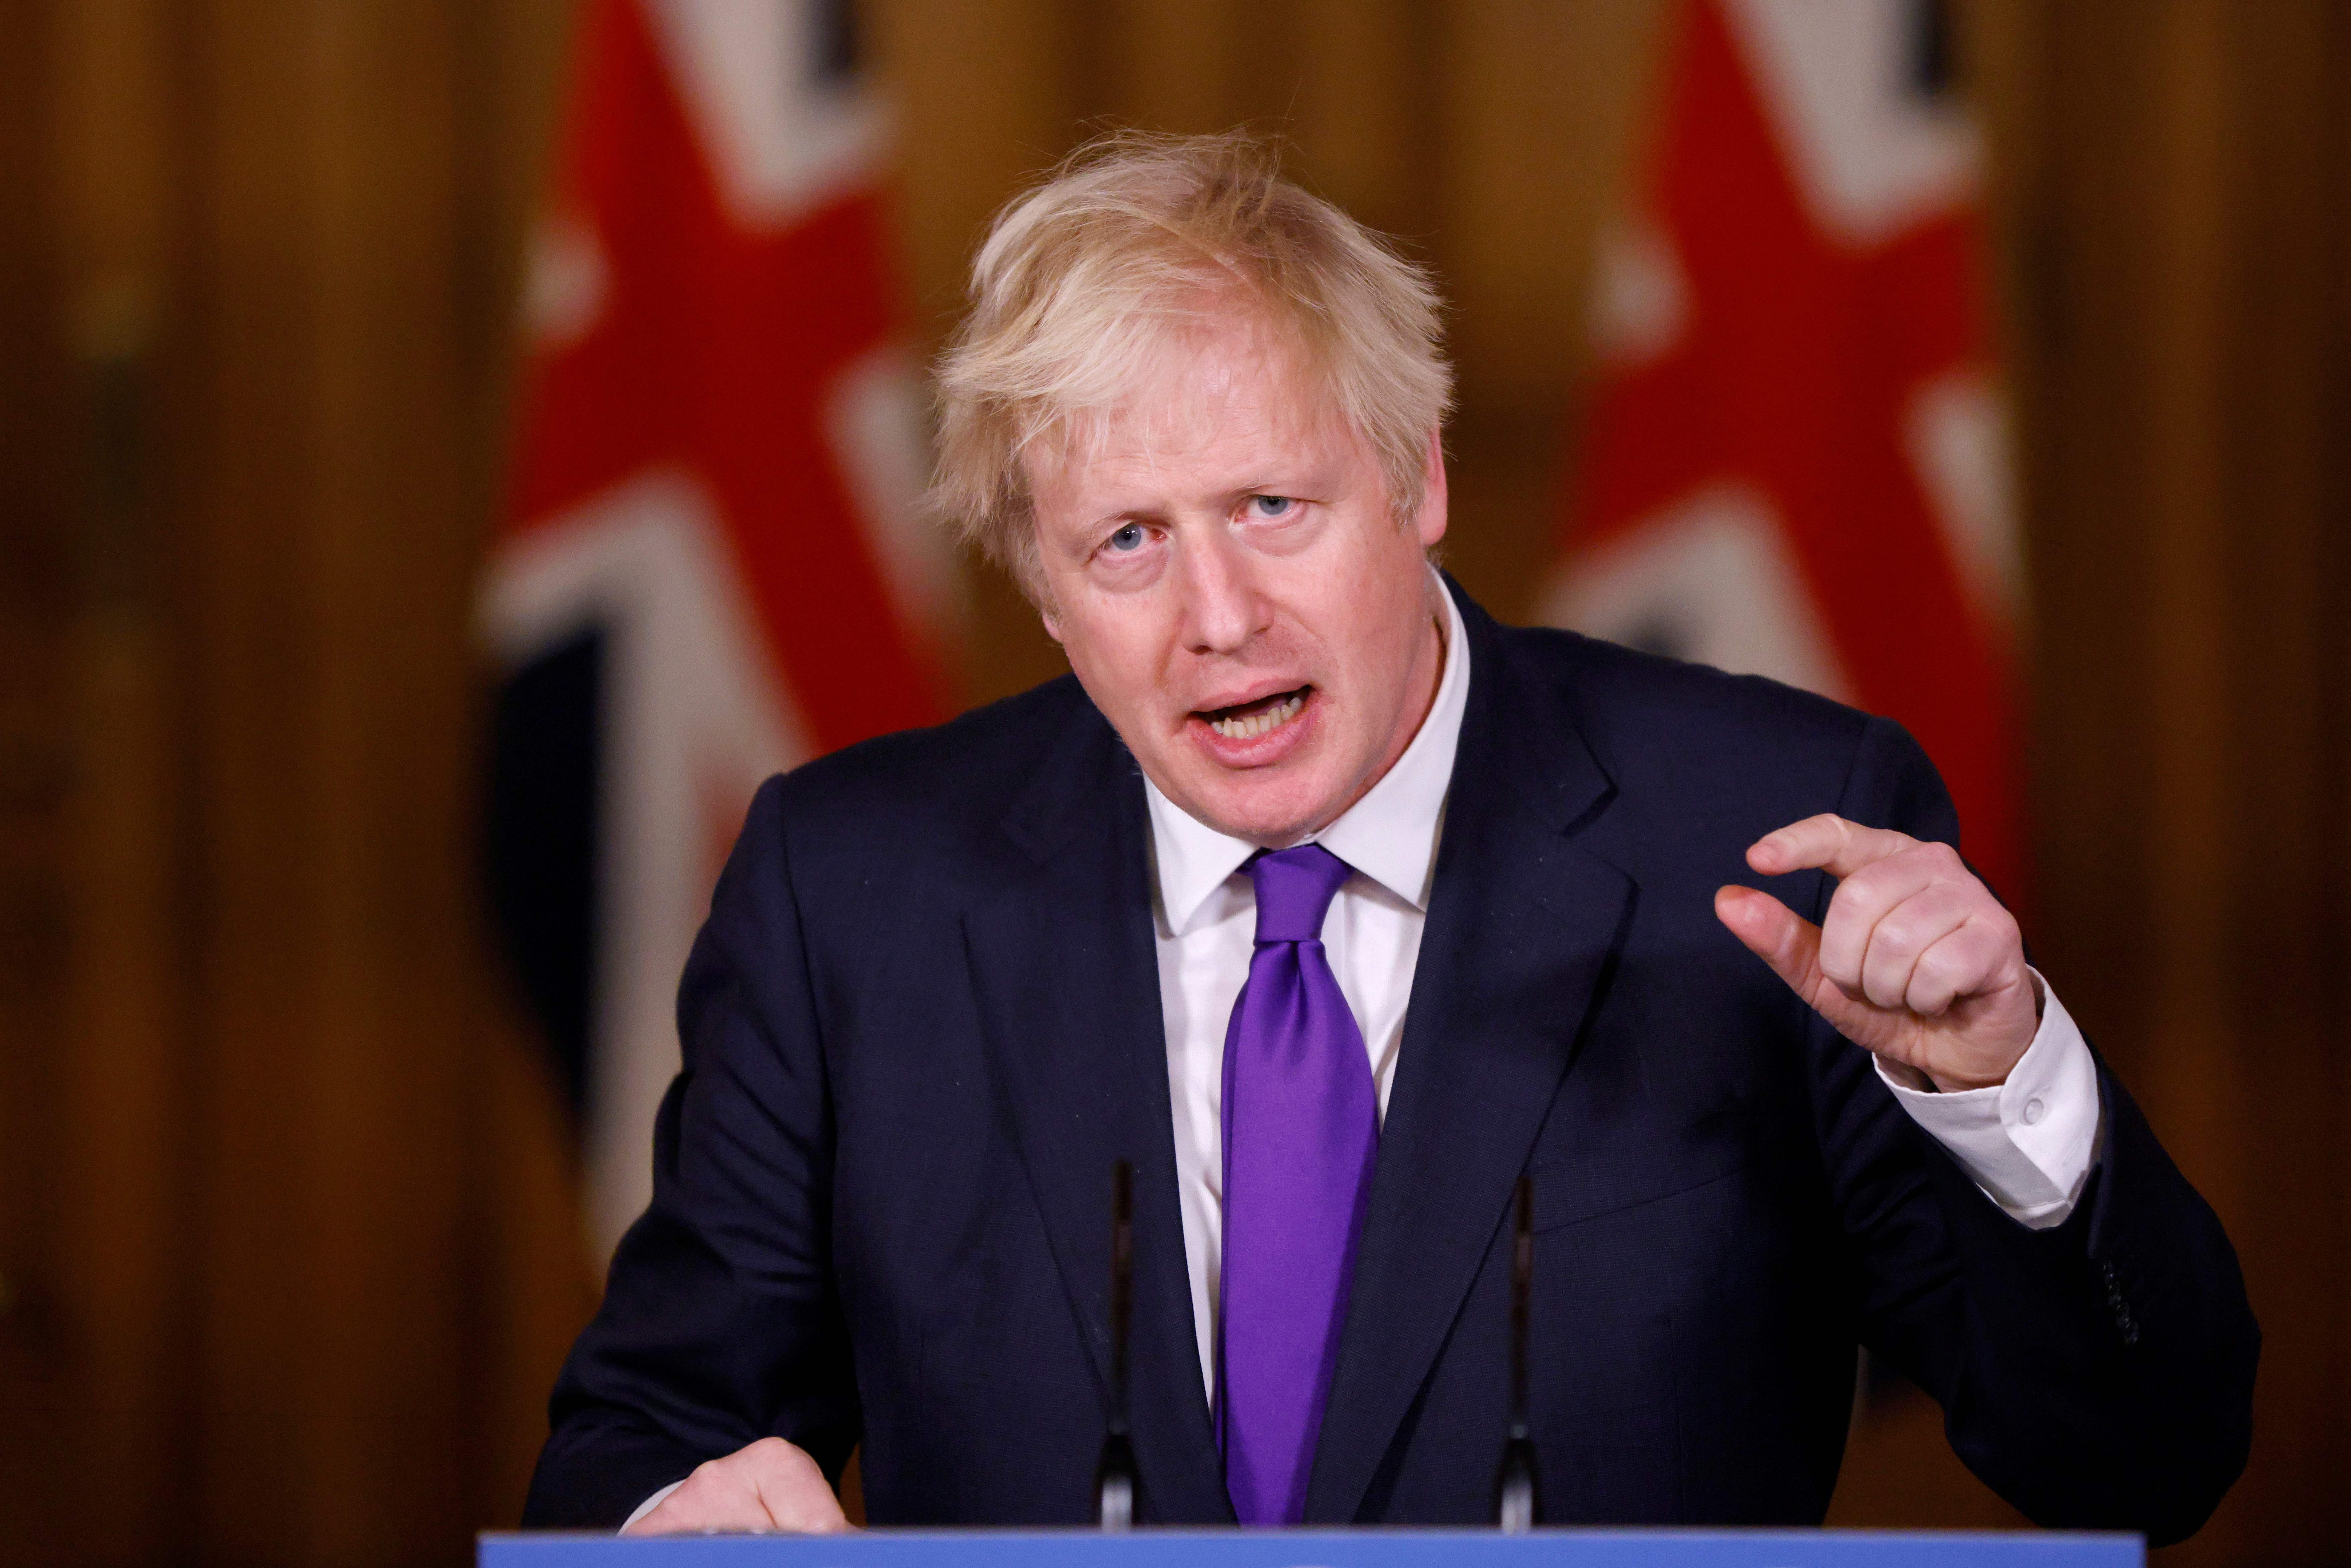 Boris Johnson speaks during a virtual press conference inside 10 Downing Street in central London on December 2, 2020.